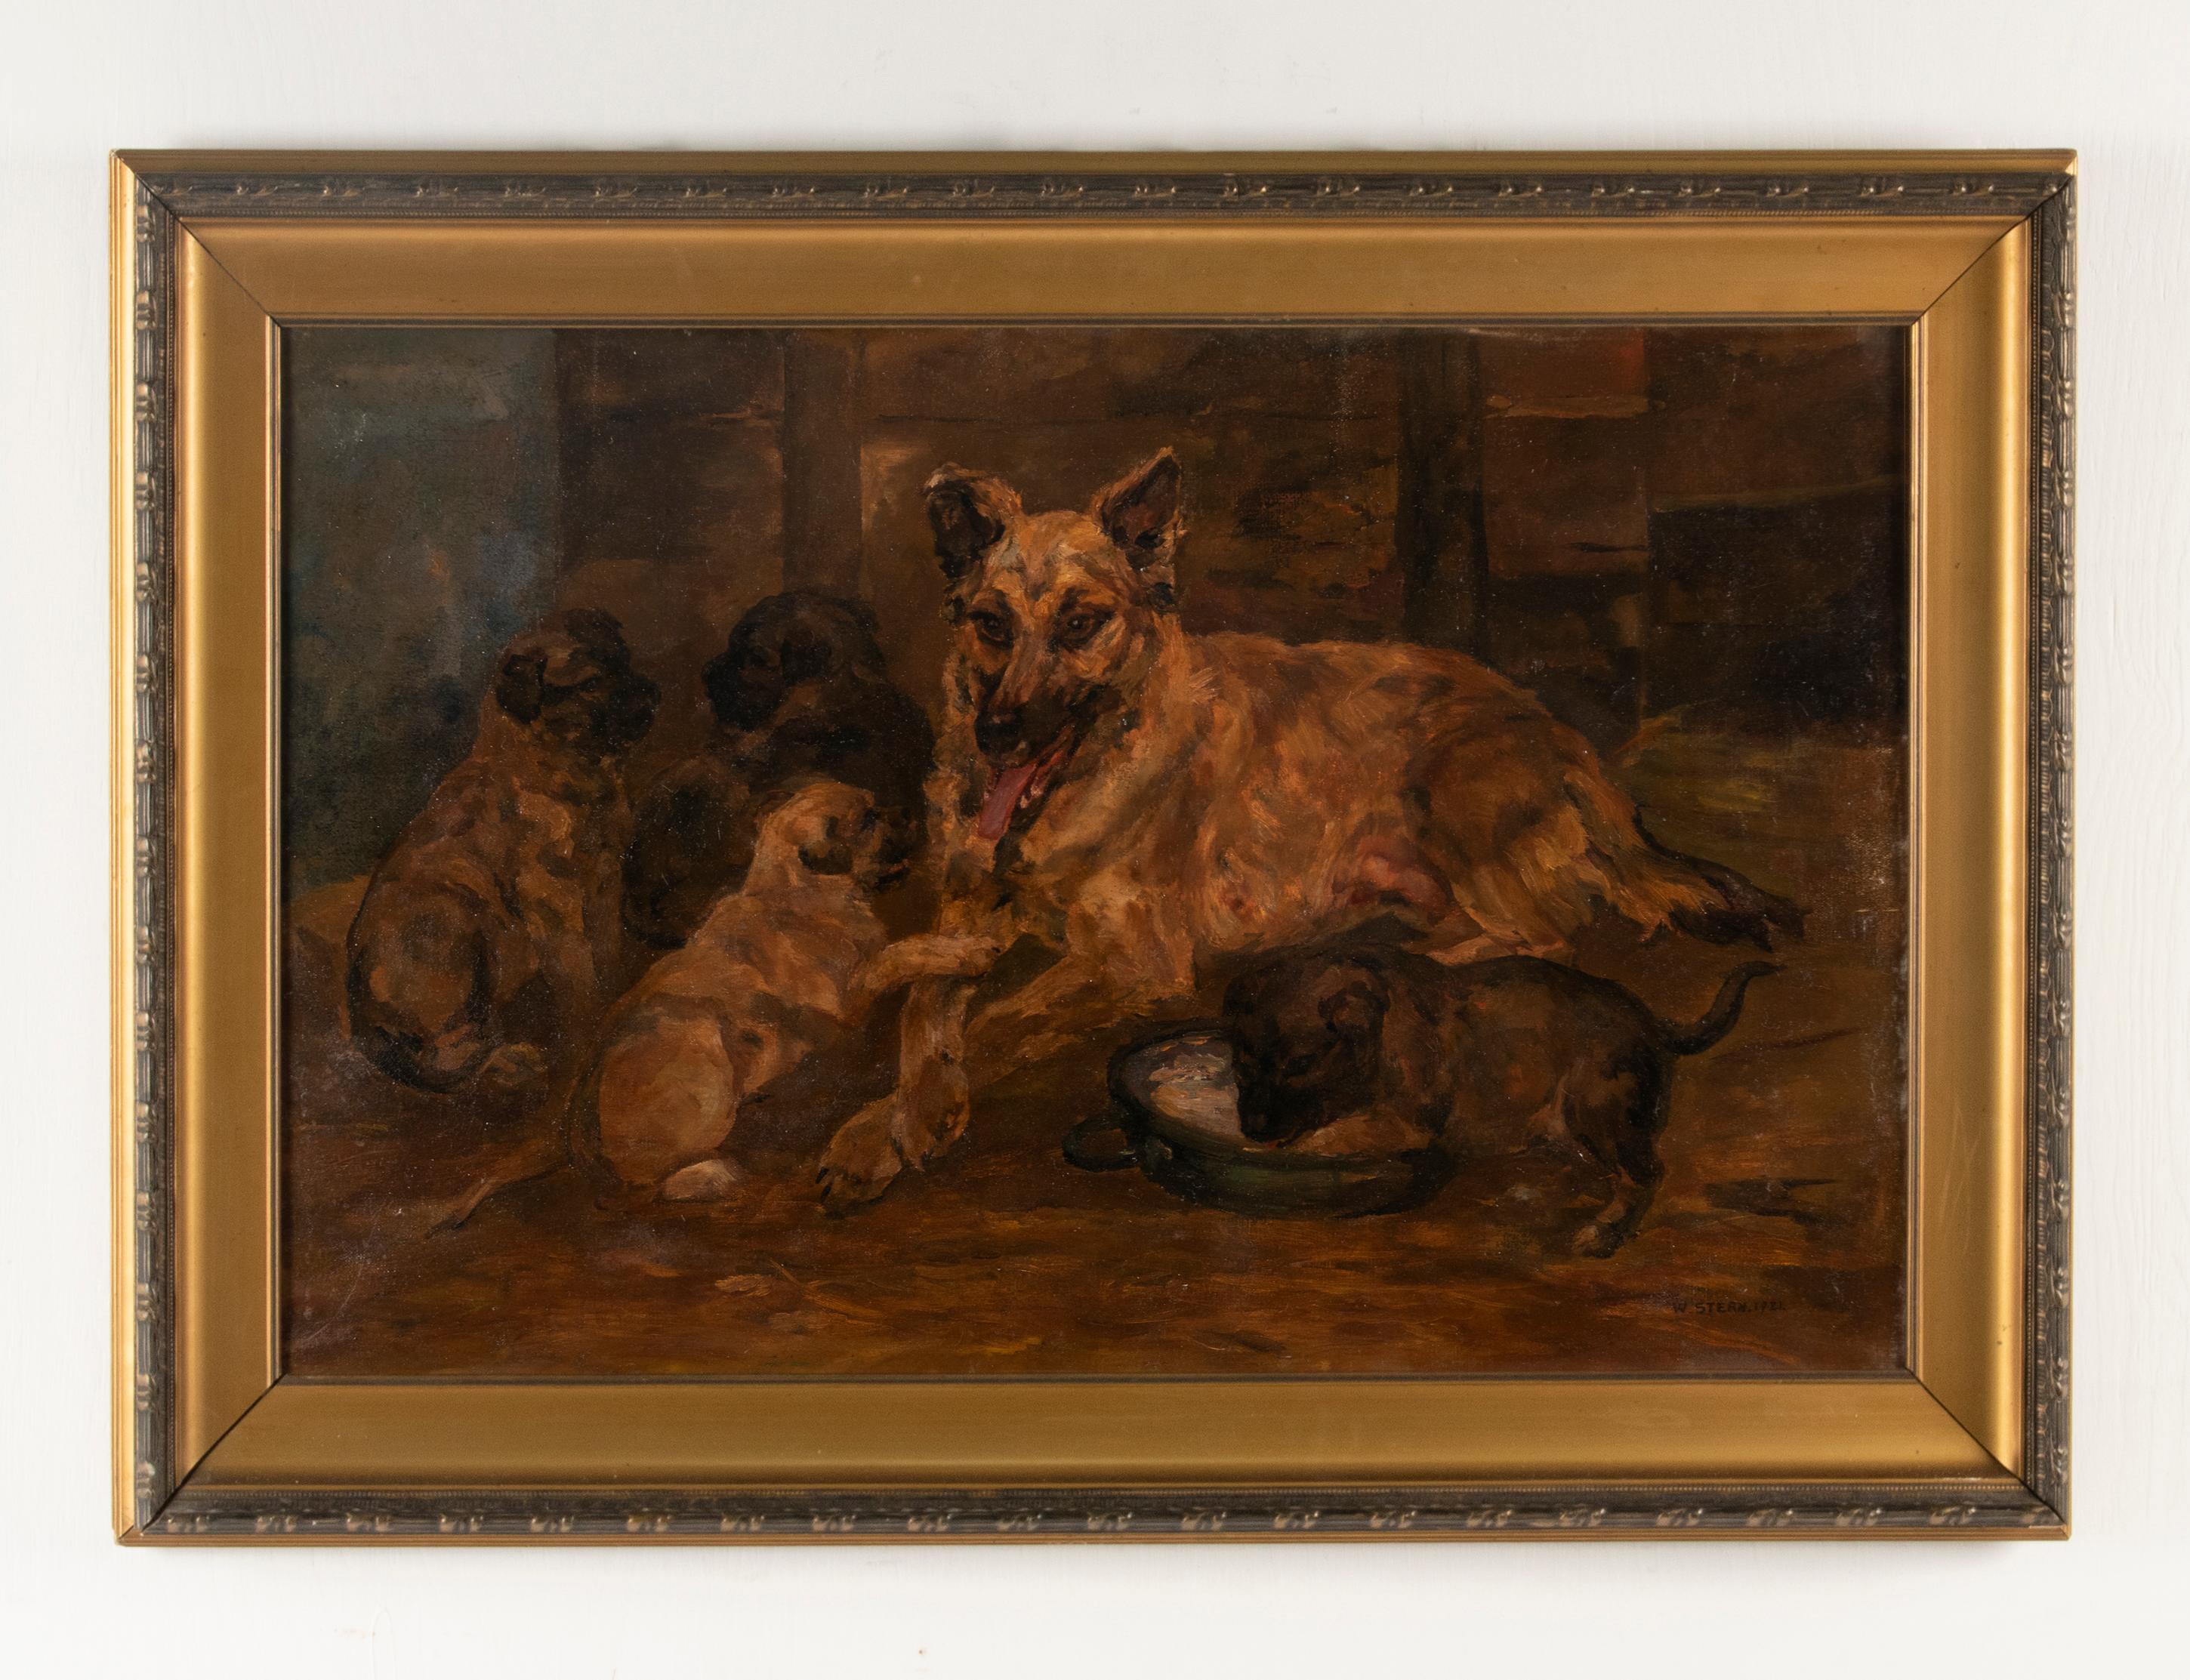 Beautiful antique painting depicting a Malinois (Belgian Sheppard dog) with her puppies.
The painting is very atmospheric, with beautiful light-dark contrasts.
The painting is framed in a beautiful gilded frame, original from the time.
Signature